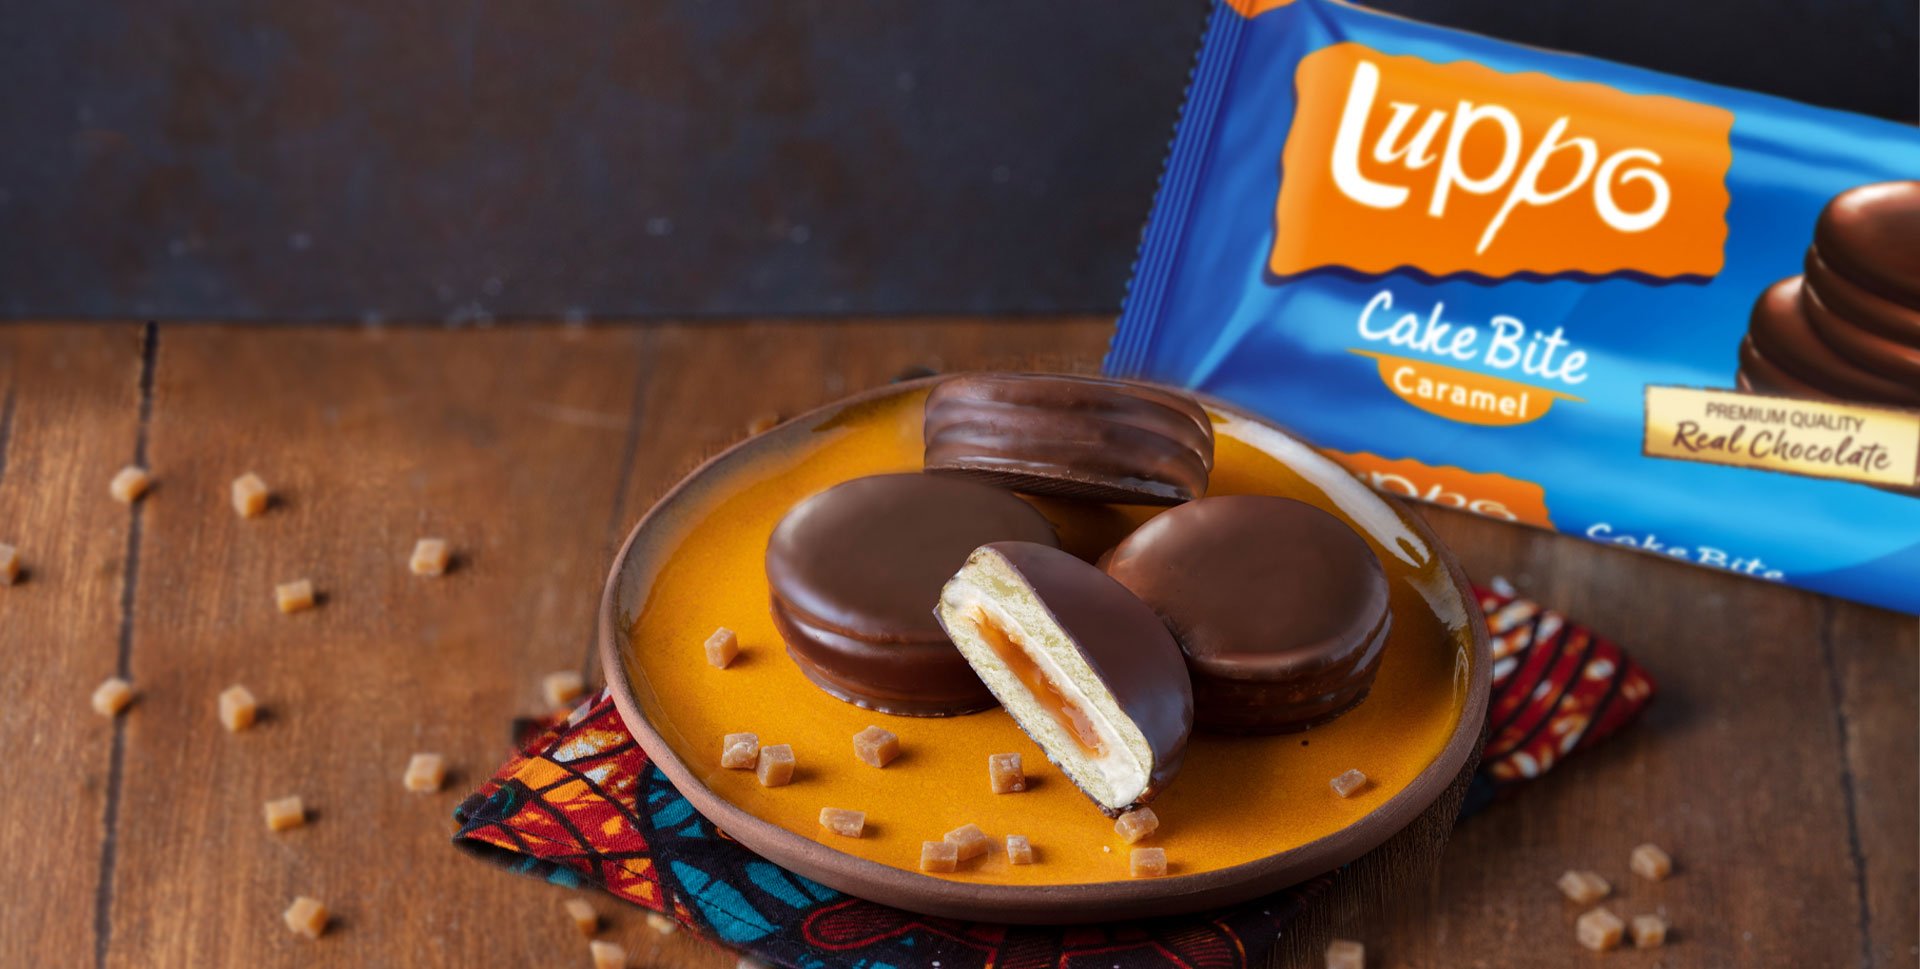 Buy Luppo Cake Bite Chocolate | Order Groceries Online | MyValue365